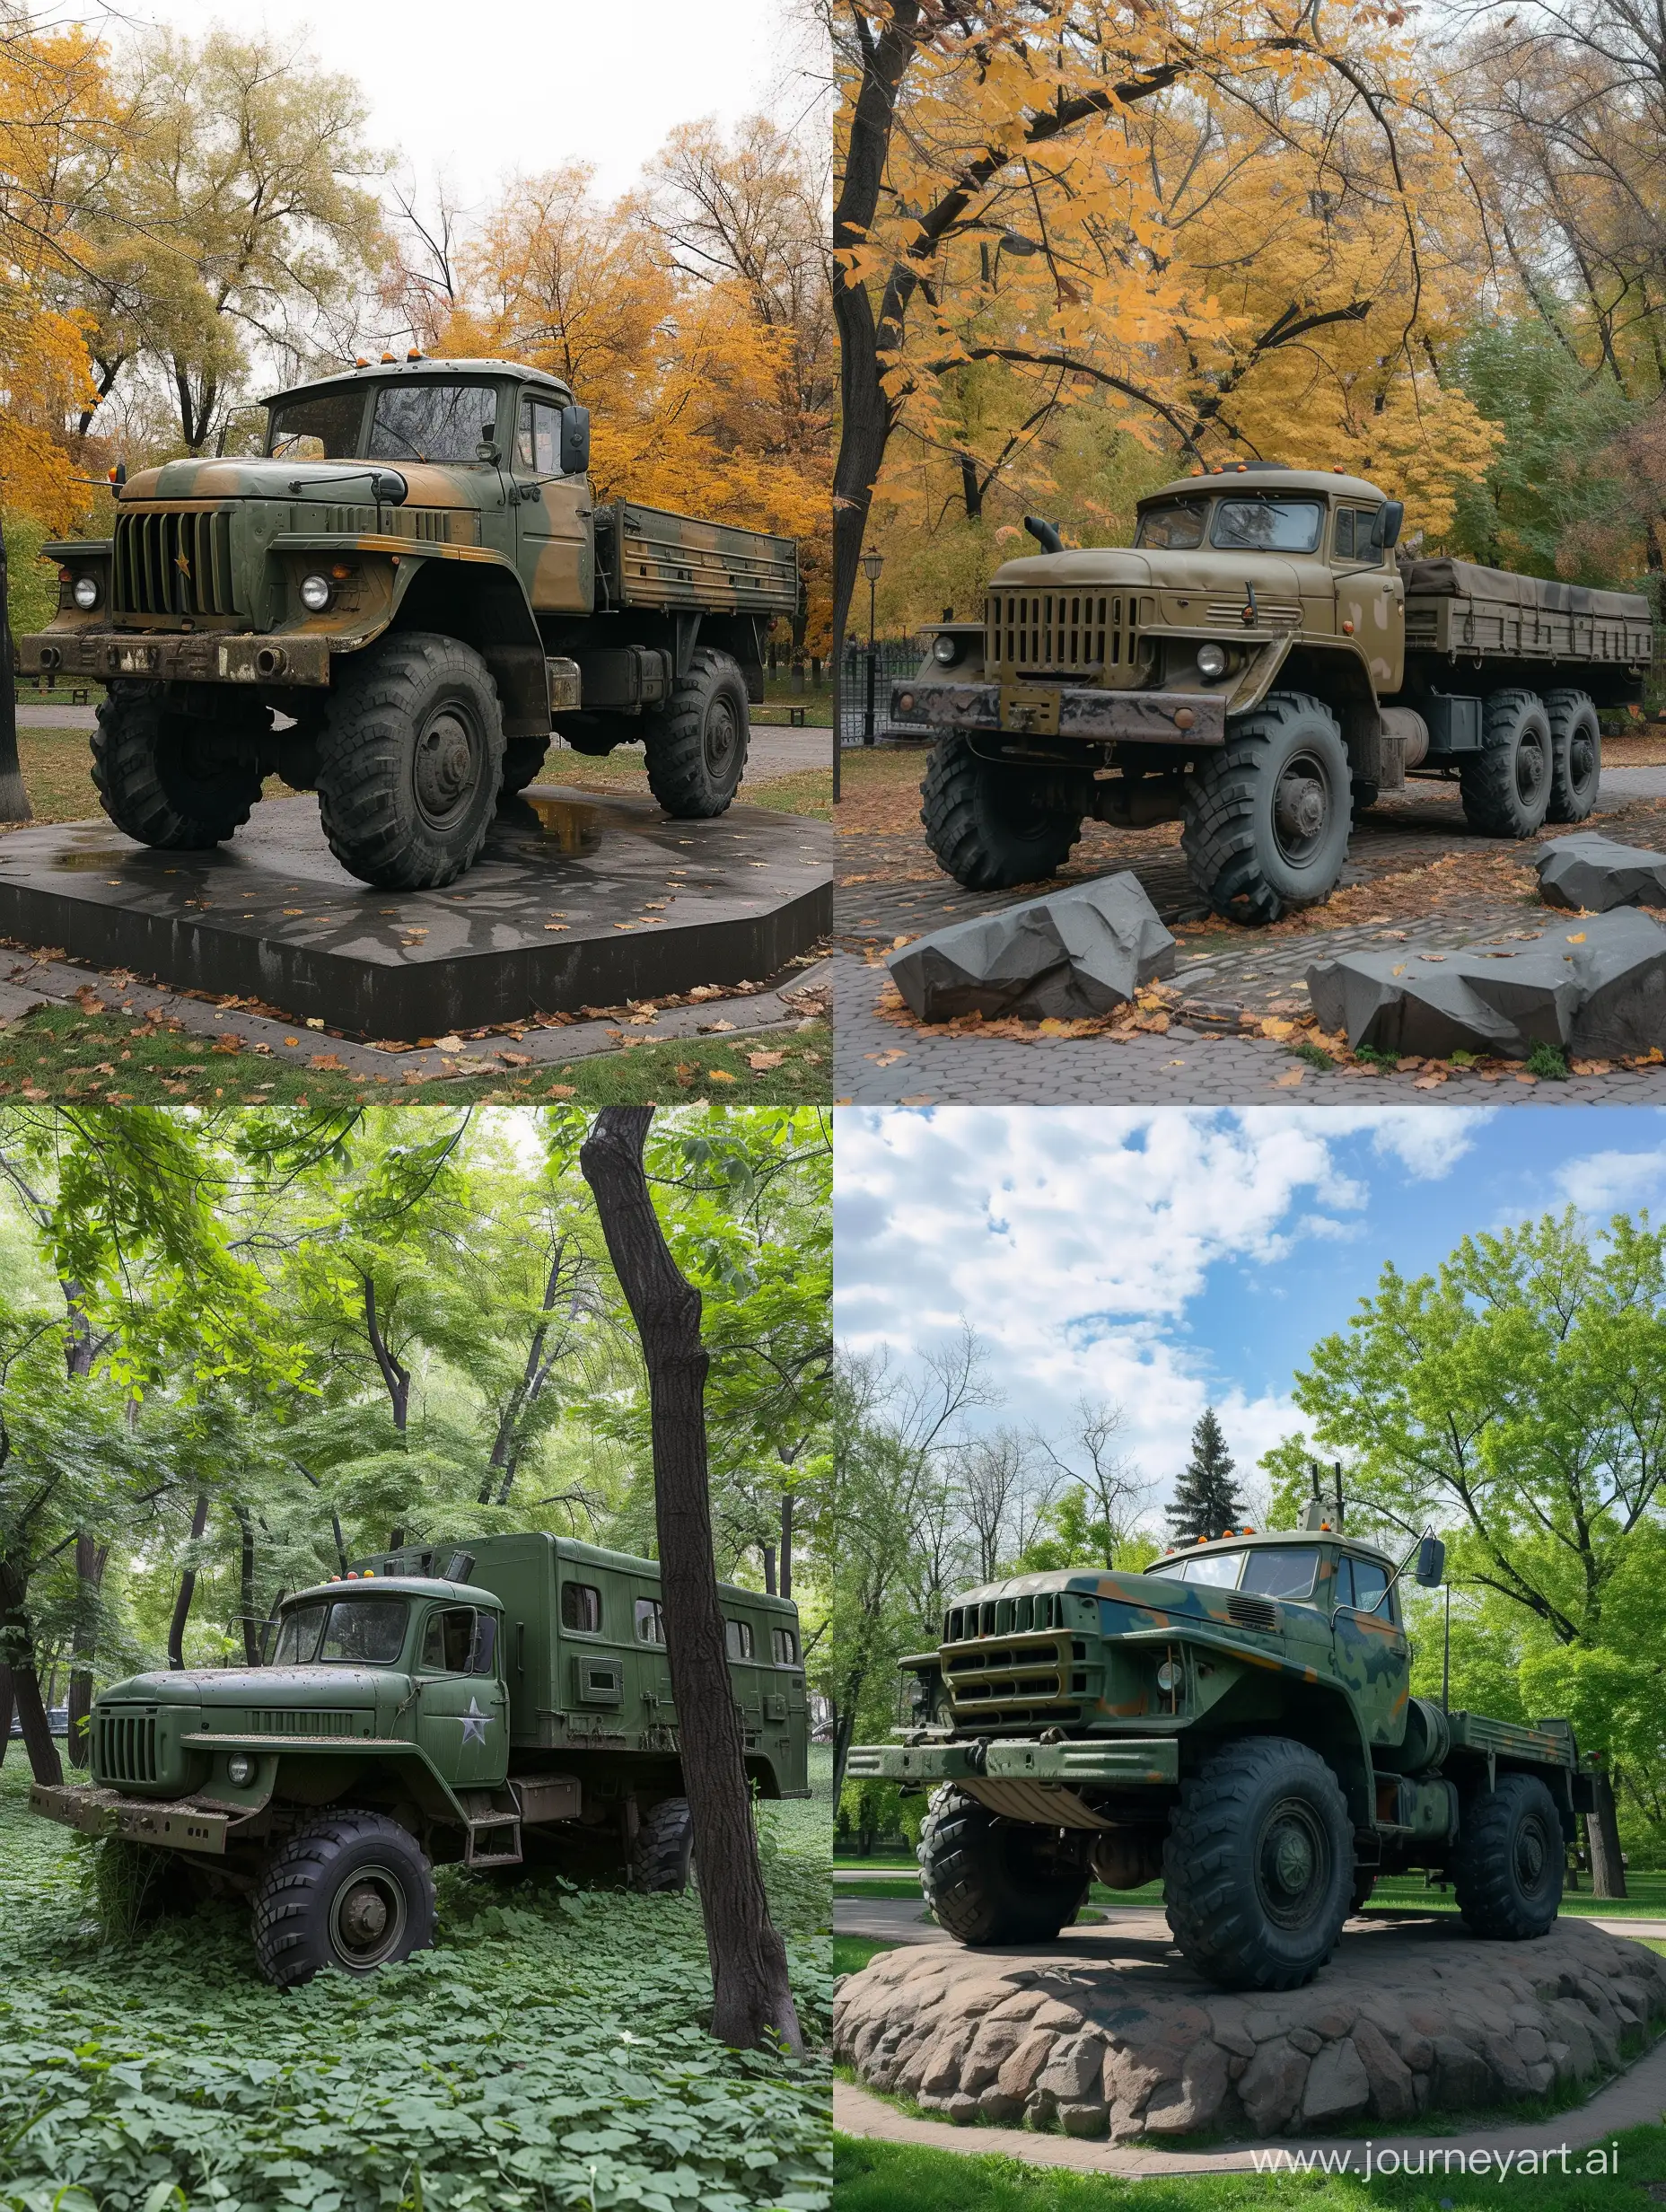 Military trucks "Ural" as an art object in the park